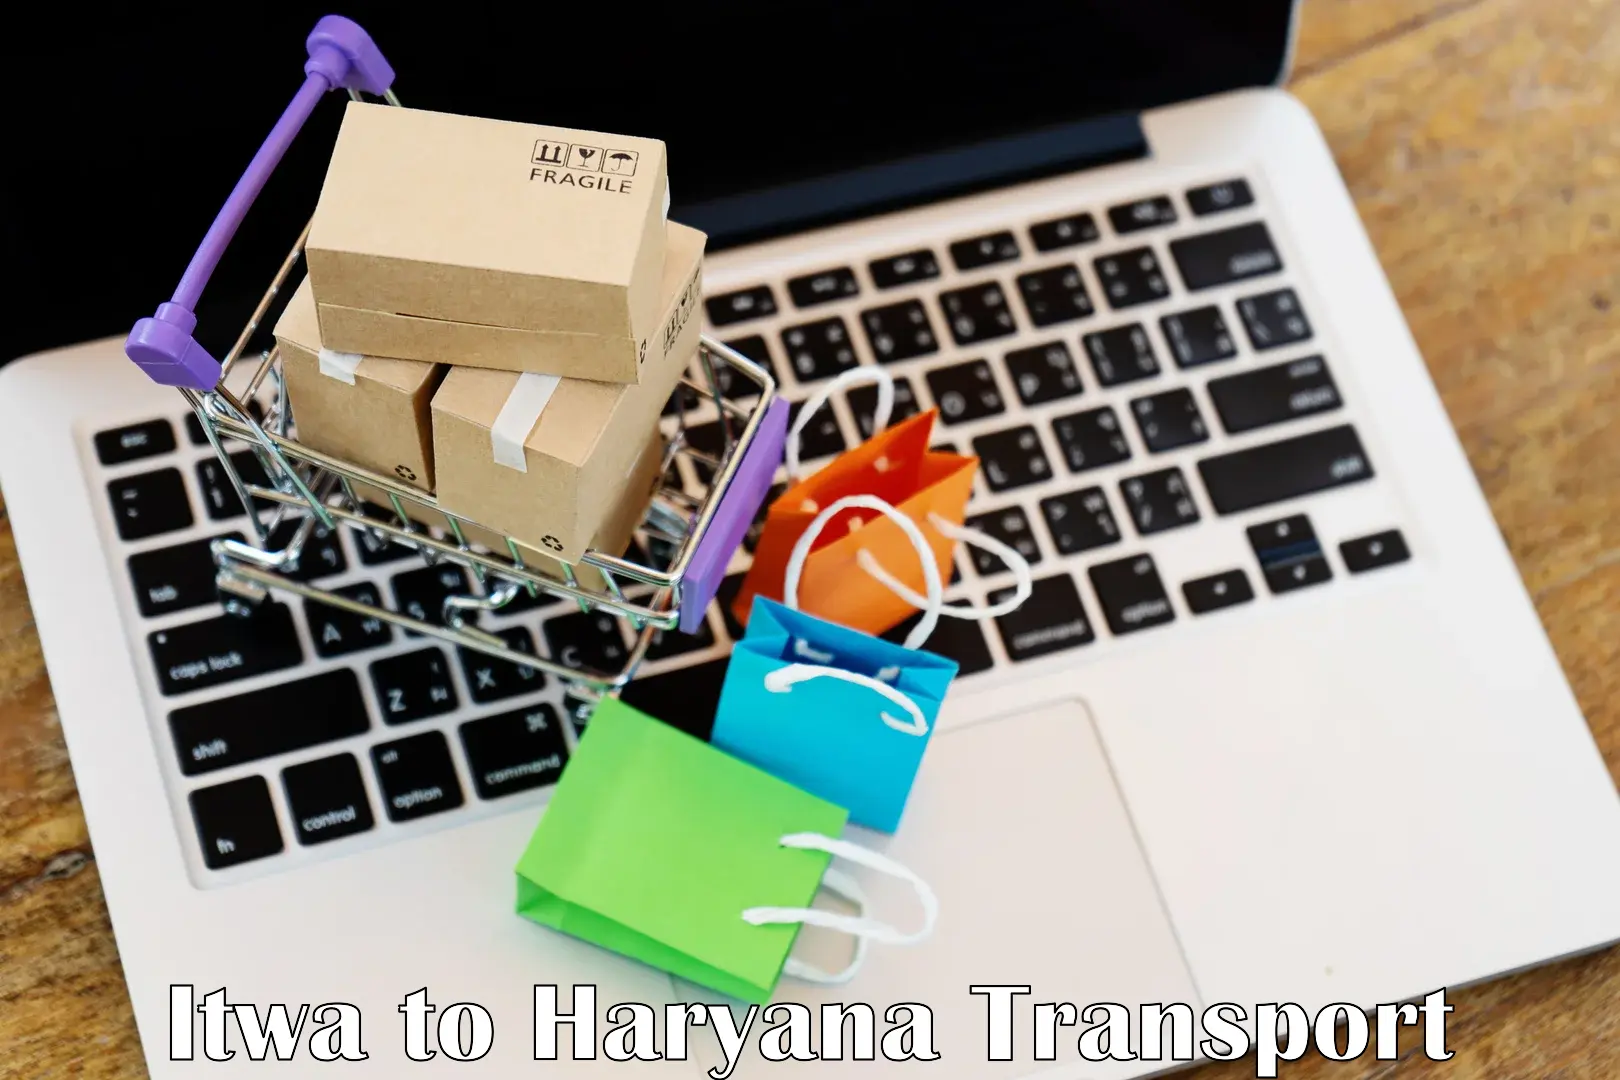 Container transport service Itwa to Haryana